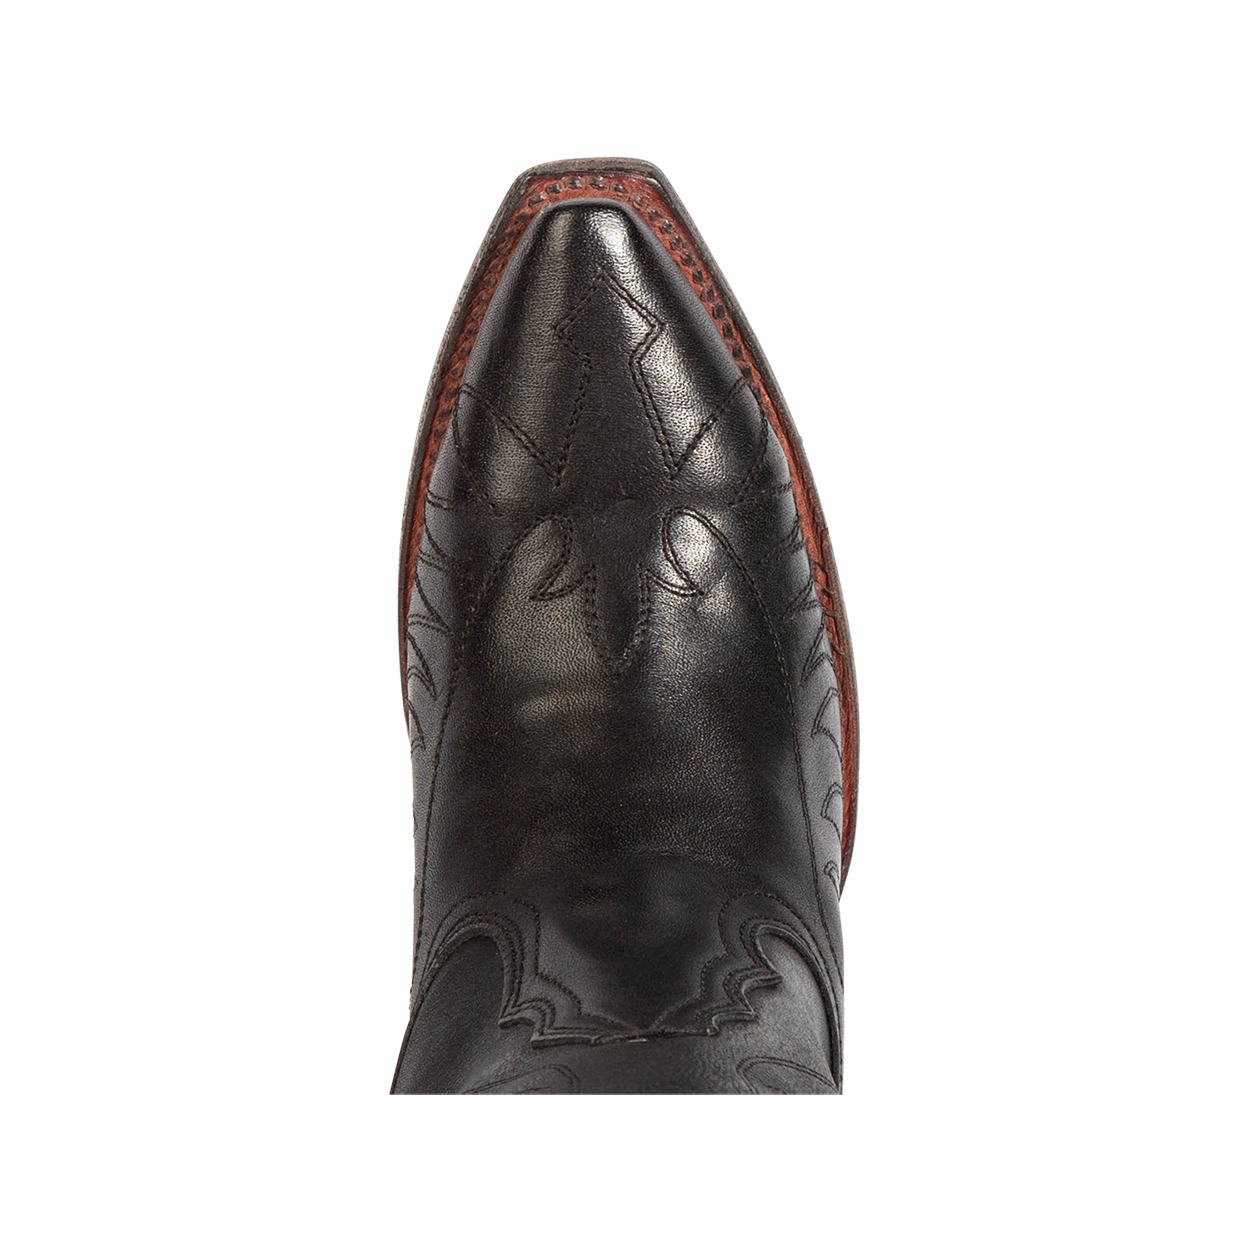 Top view showing snip toe construction with stitch detailing on FREEBIRD women's Misty black leather tall western boot